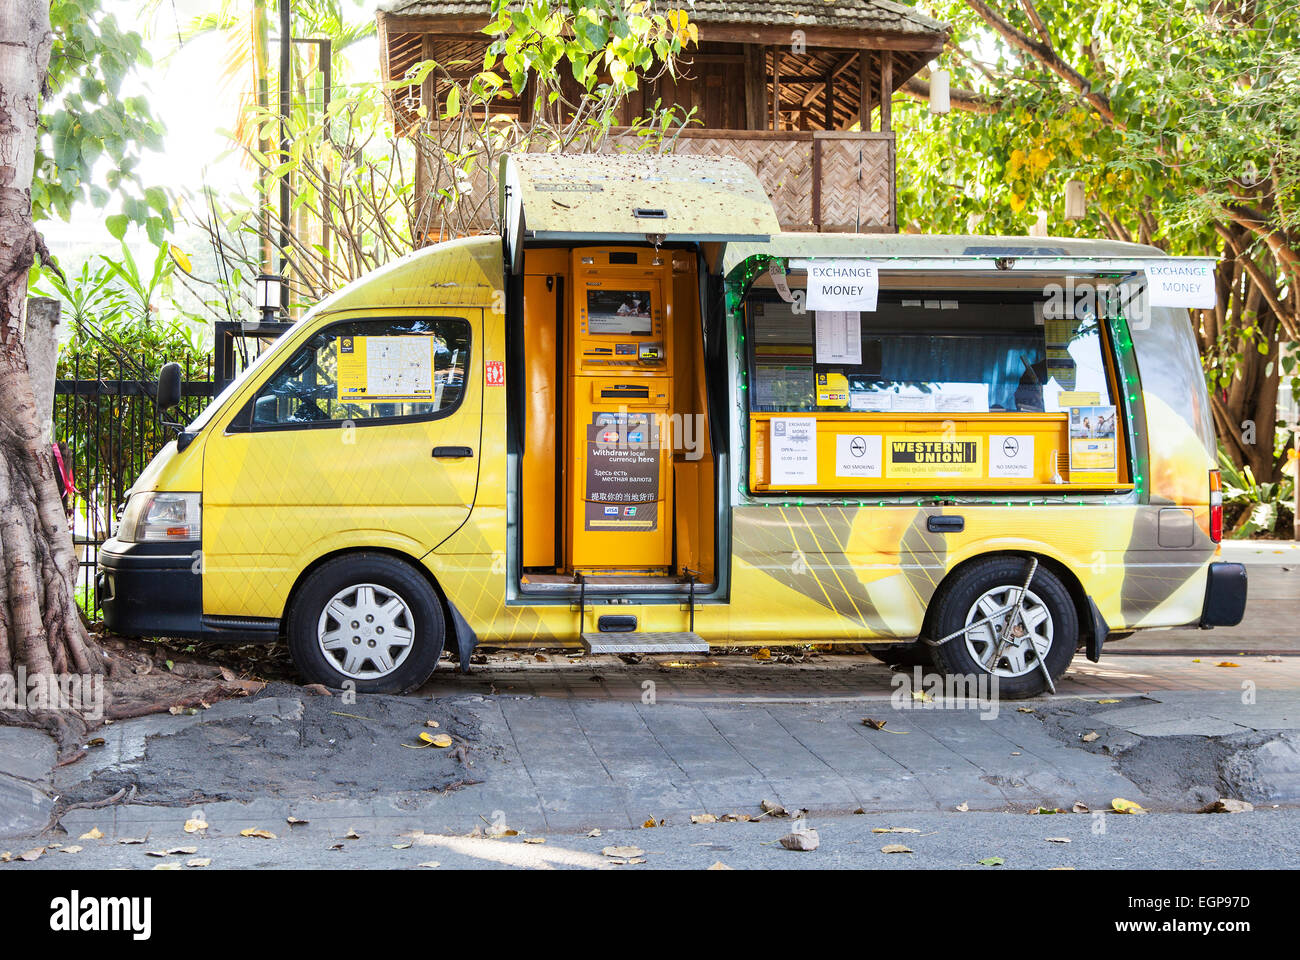 Mobile Atm High Resolution Stock Photography and Images - Alamy